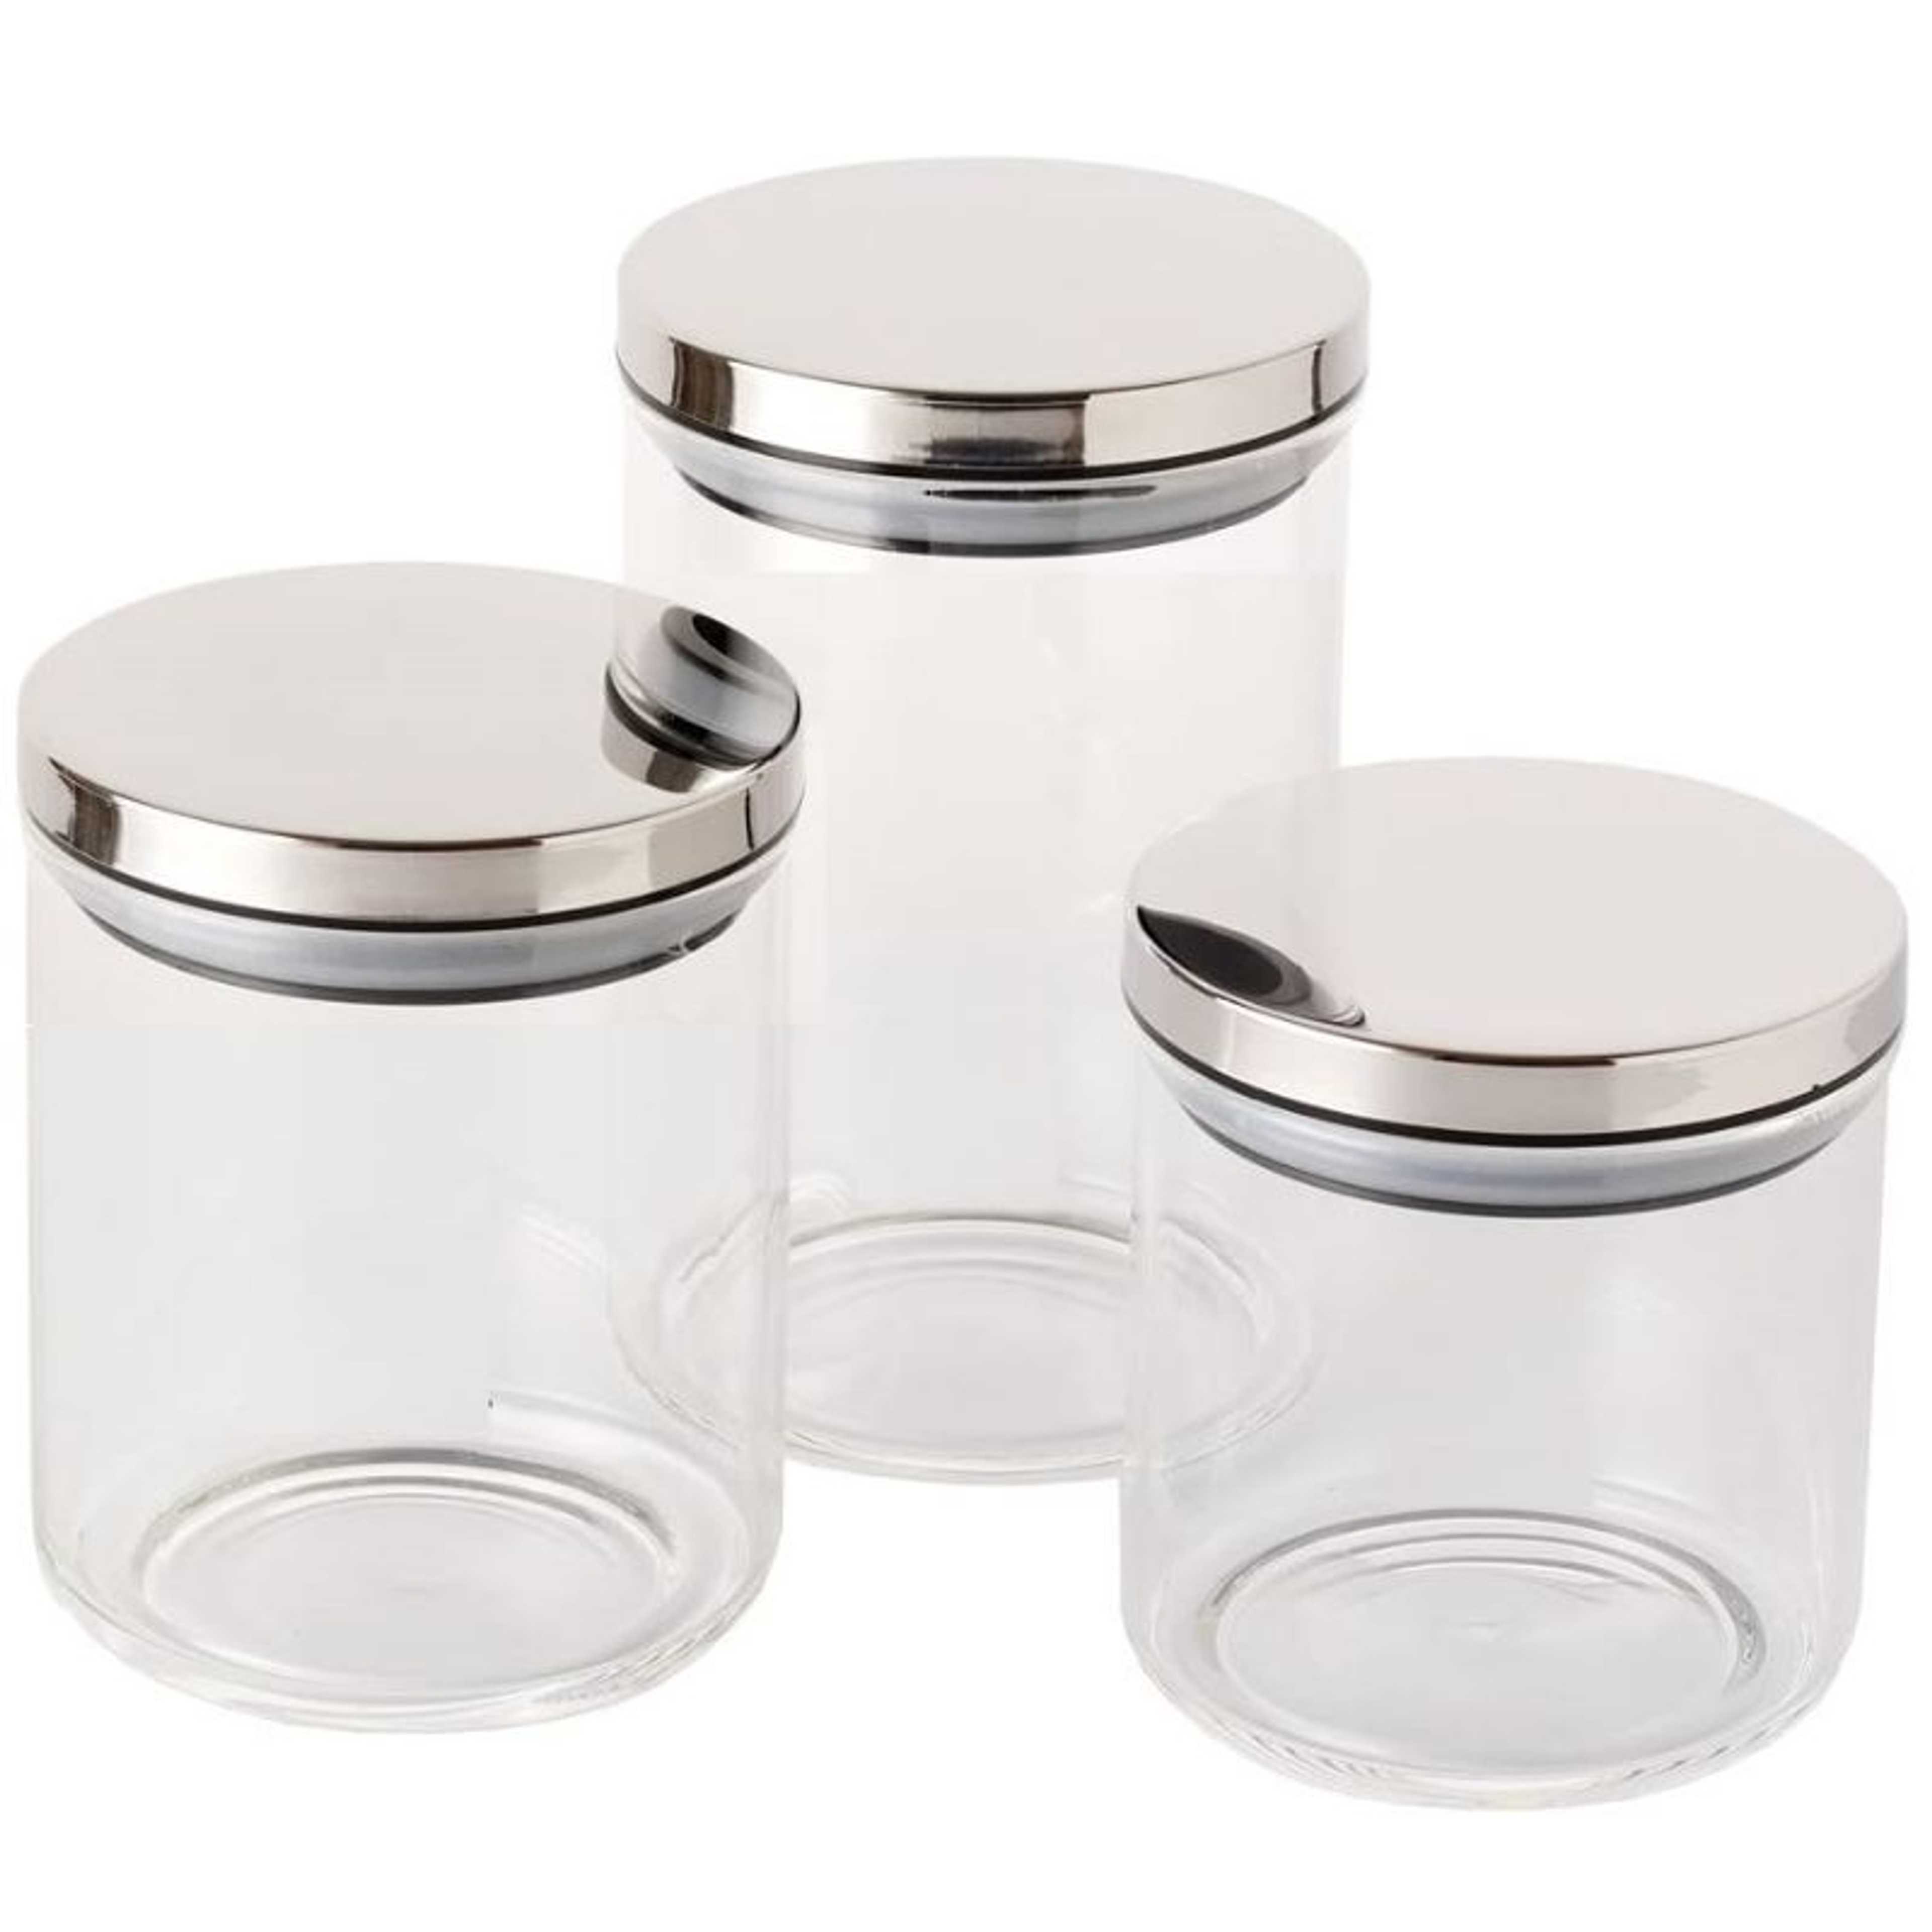 Set of 3 - Glass Kitchen Jars With Stainless Steel Lids For Spice/Herbs/Cookies/Pasta/Candies/Stationery/Beads & Other Small Items